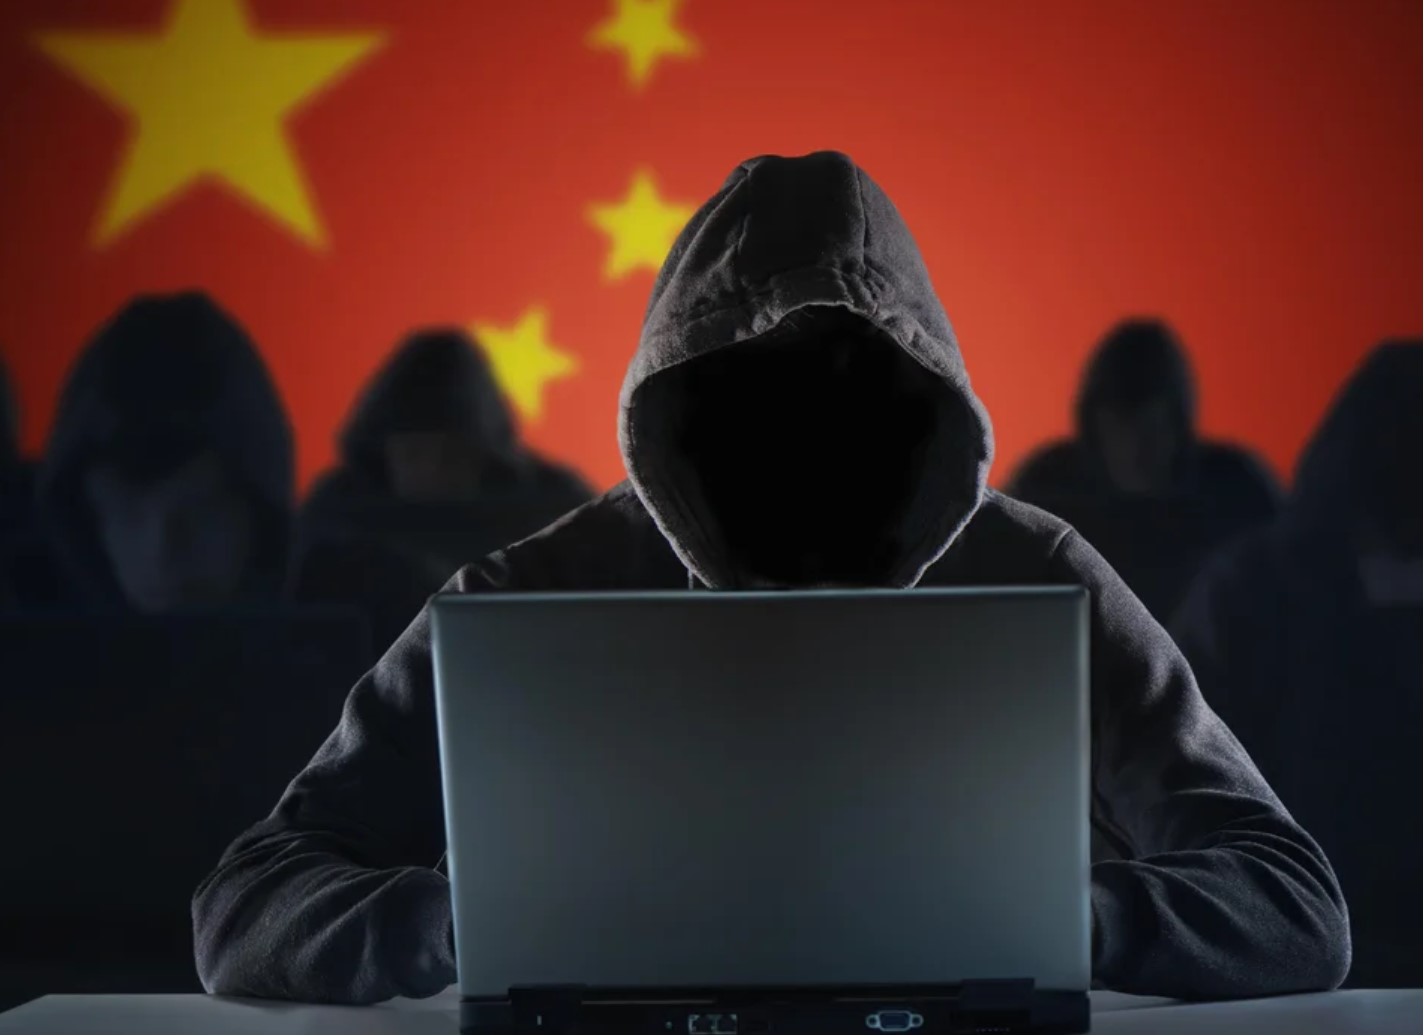 Microsoft Digital Threats from East Asia Report – chilling